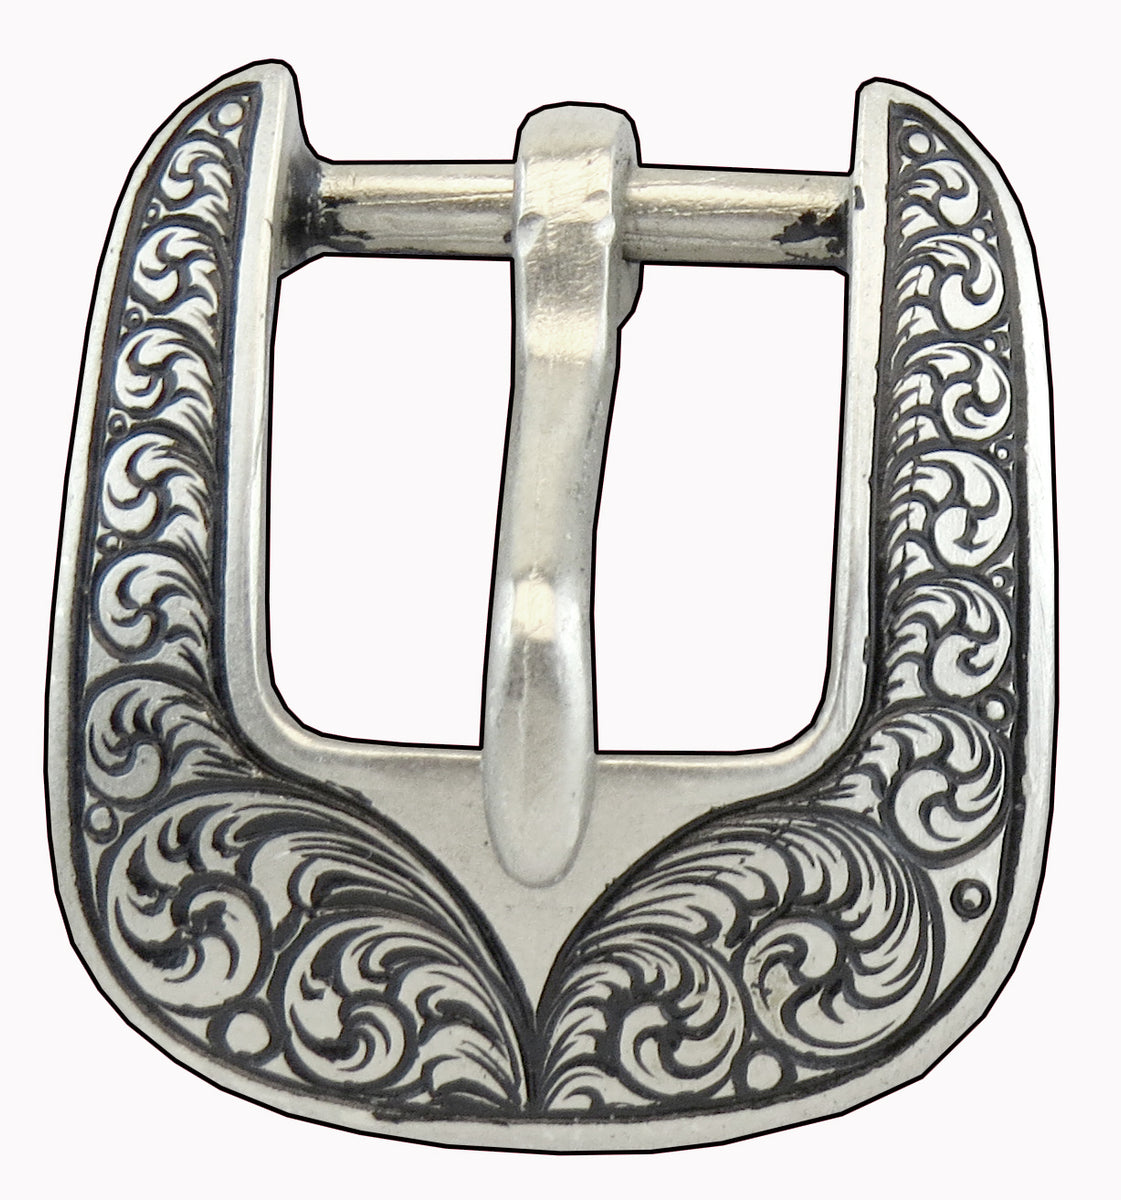 Buckle Snap Slobber Straps W Jeremiah Watt Stainless Steel Floral Engraved  Buckles Loops for Mecate Reins Black or Silver Finish -  Finland